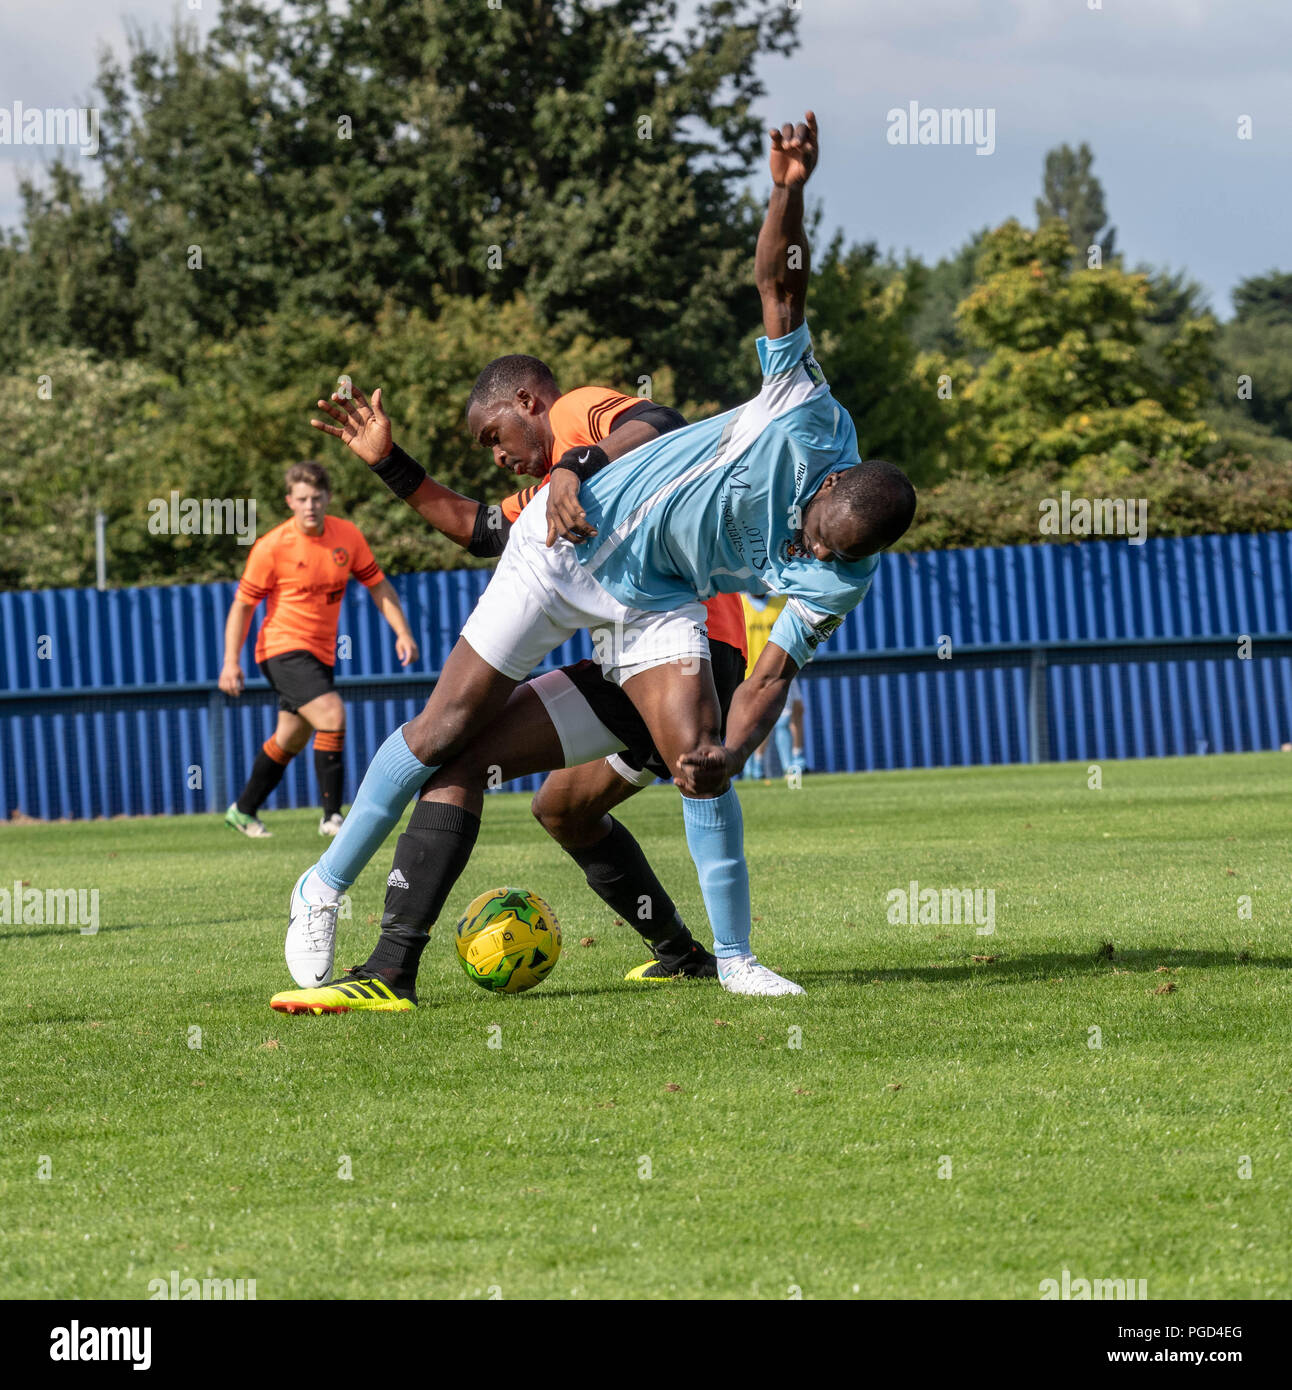 Brentwood, UK 25th August 2018 Football match; Brentwood Town FC (1) Vs Sporting Bengal United (1) at the Brentwood Town Arena in an FA Cup tie match. The Sporting Bengal set-up is unusual in that it is operated by the Bangladesh Football Association (UK) and players are selected from (and retain their affiliation with) the Sunday league clubs which are affiliated to that organisation, Sporting Bengal United FC was therefore established in 1996 to challenge the under-representation of Asians in football. Credit: Ian Davidson/Alamy Live News Stock Photo